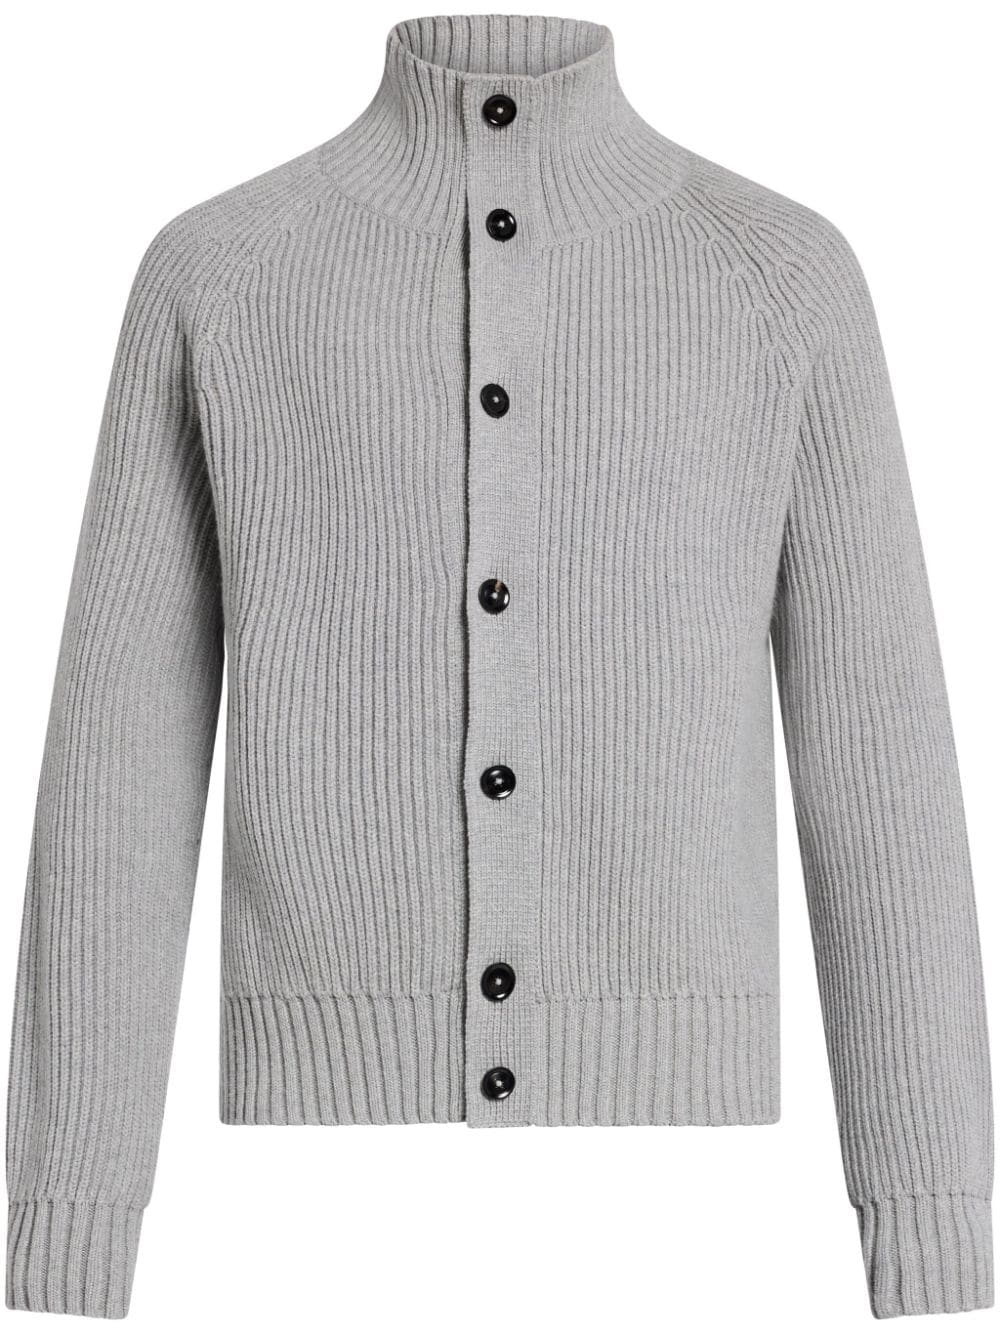 TOM FORD long-sleeve knitted wool-blend cardigan - Grey von TOM FORD